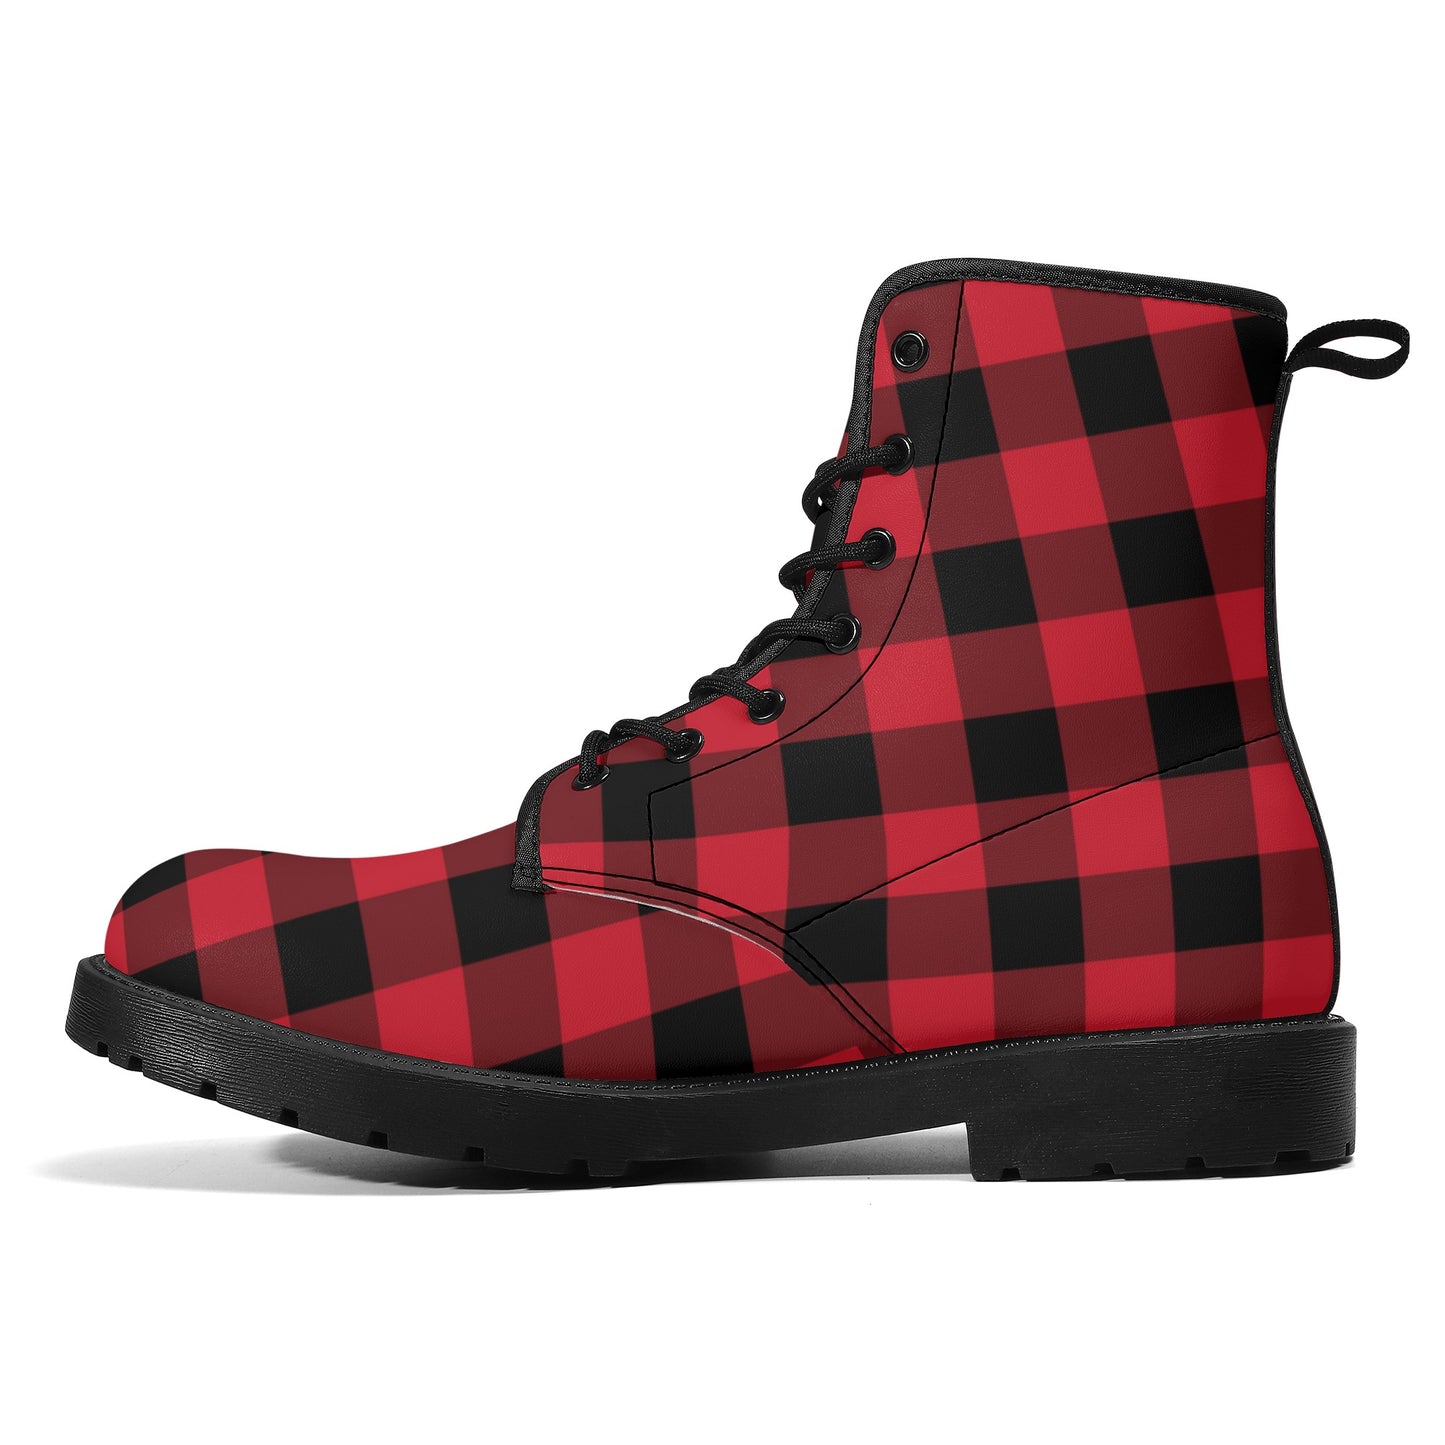 Red Buffalo Plaid Men Leather Boots, Check Vegan Lace Up Shoes Hiking Festival Black Ankle Combat Work Winter Waterproof Guys Male